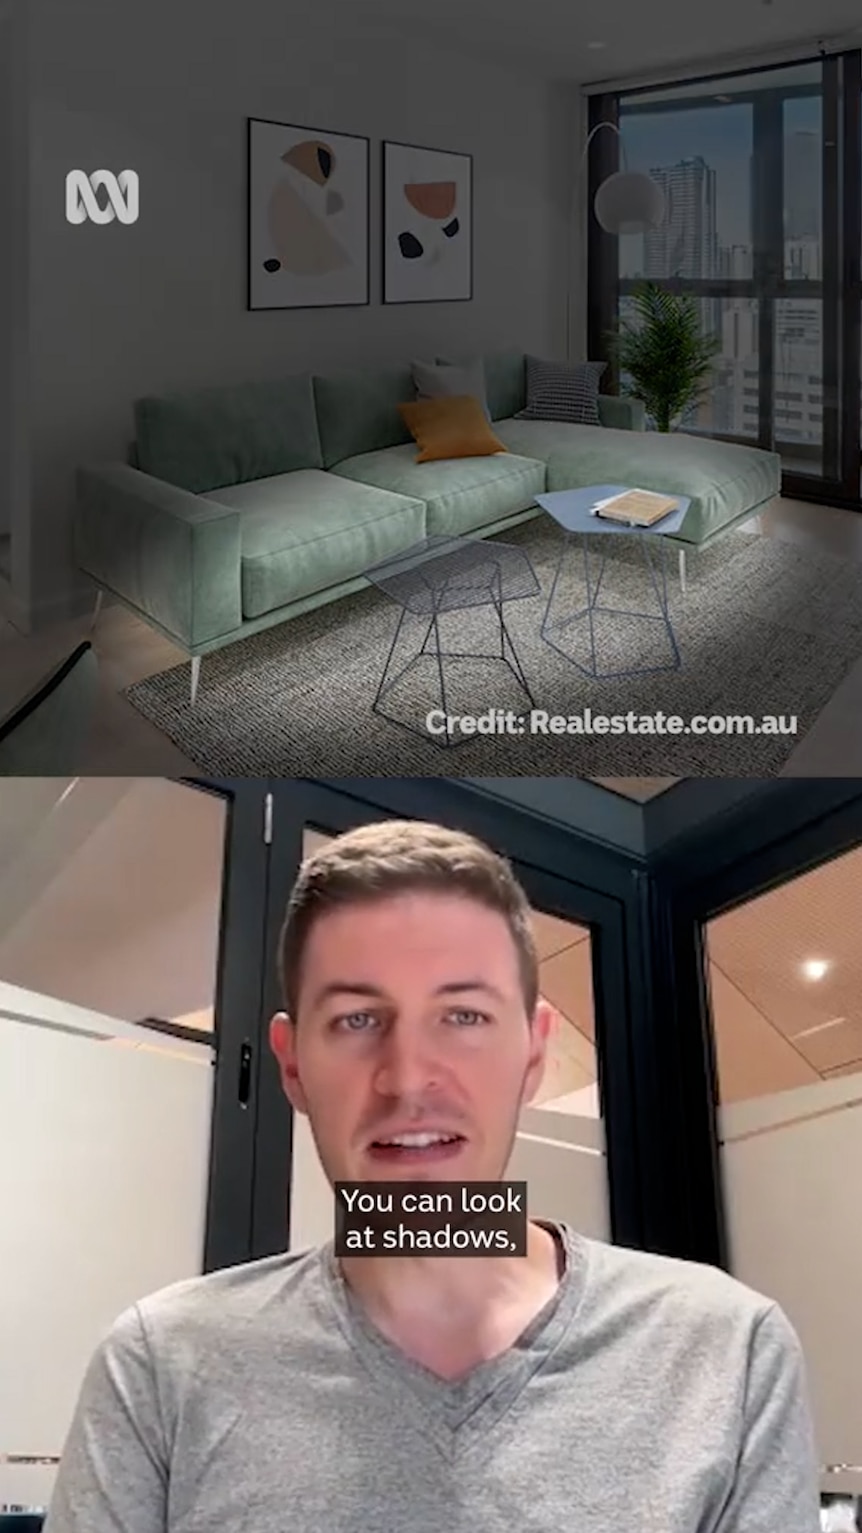 Top half of screen highlights the use of AI in a real estate listing, bottom half of screen shows man talking to camera